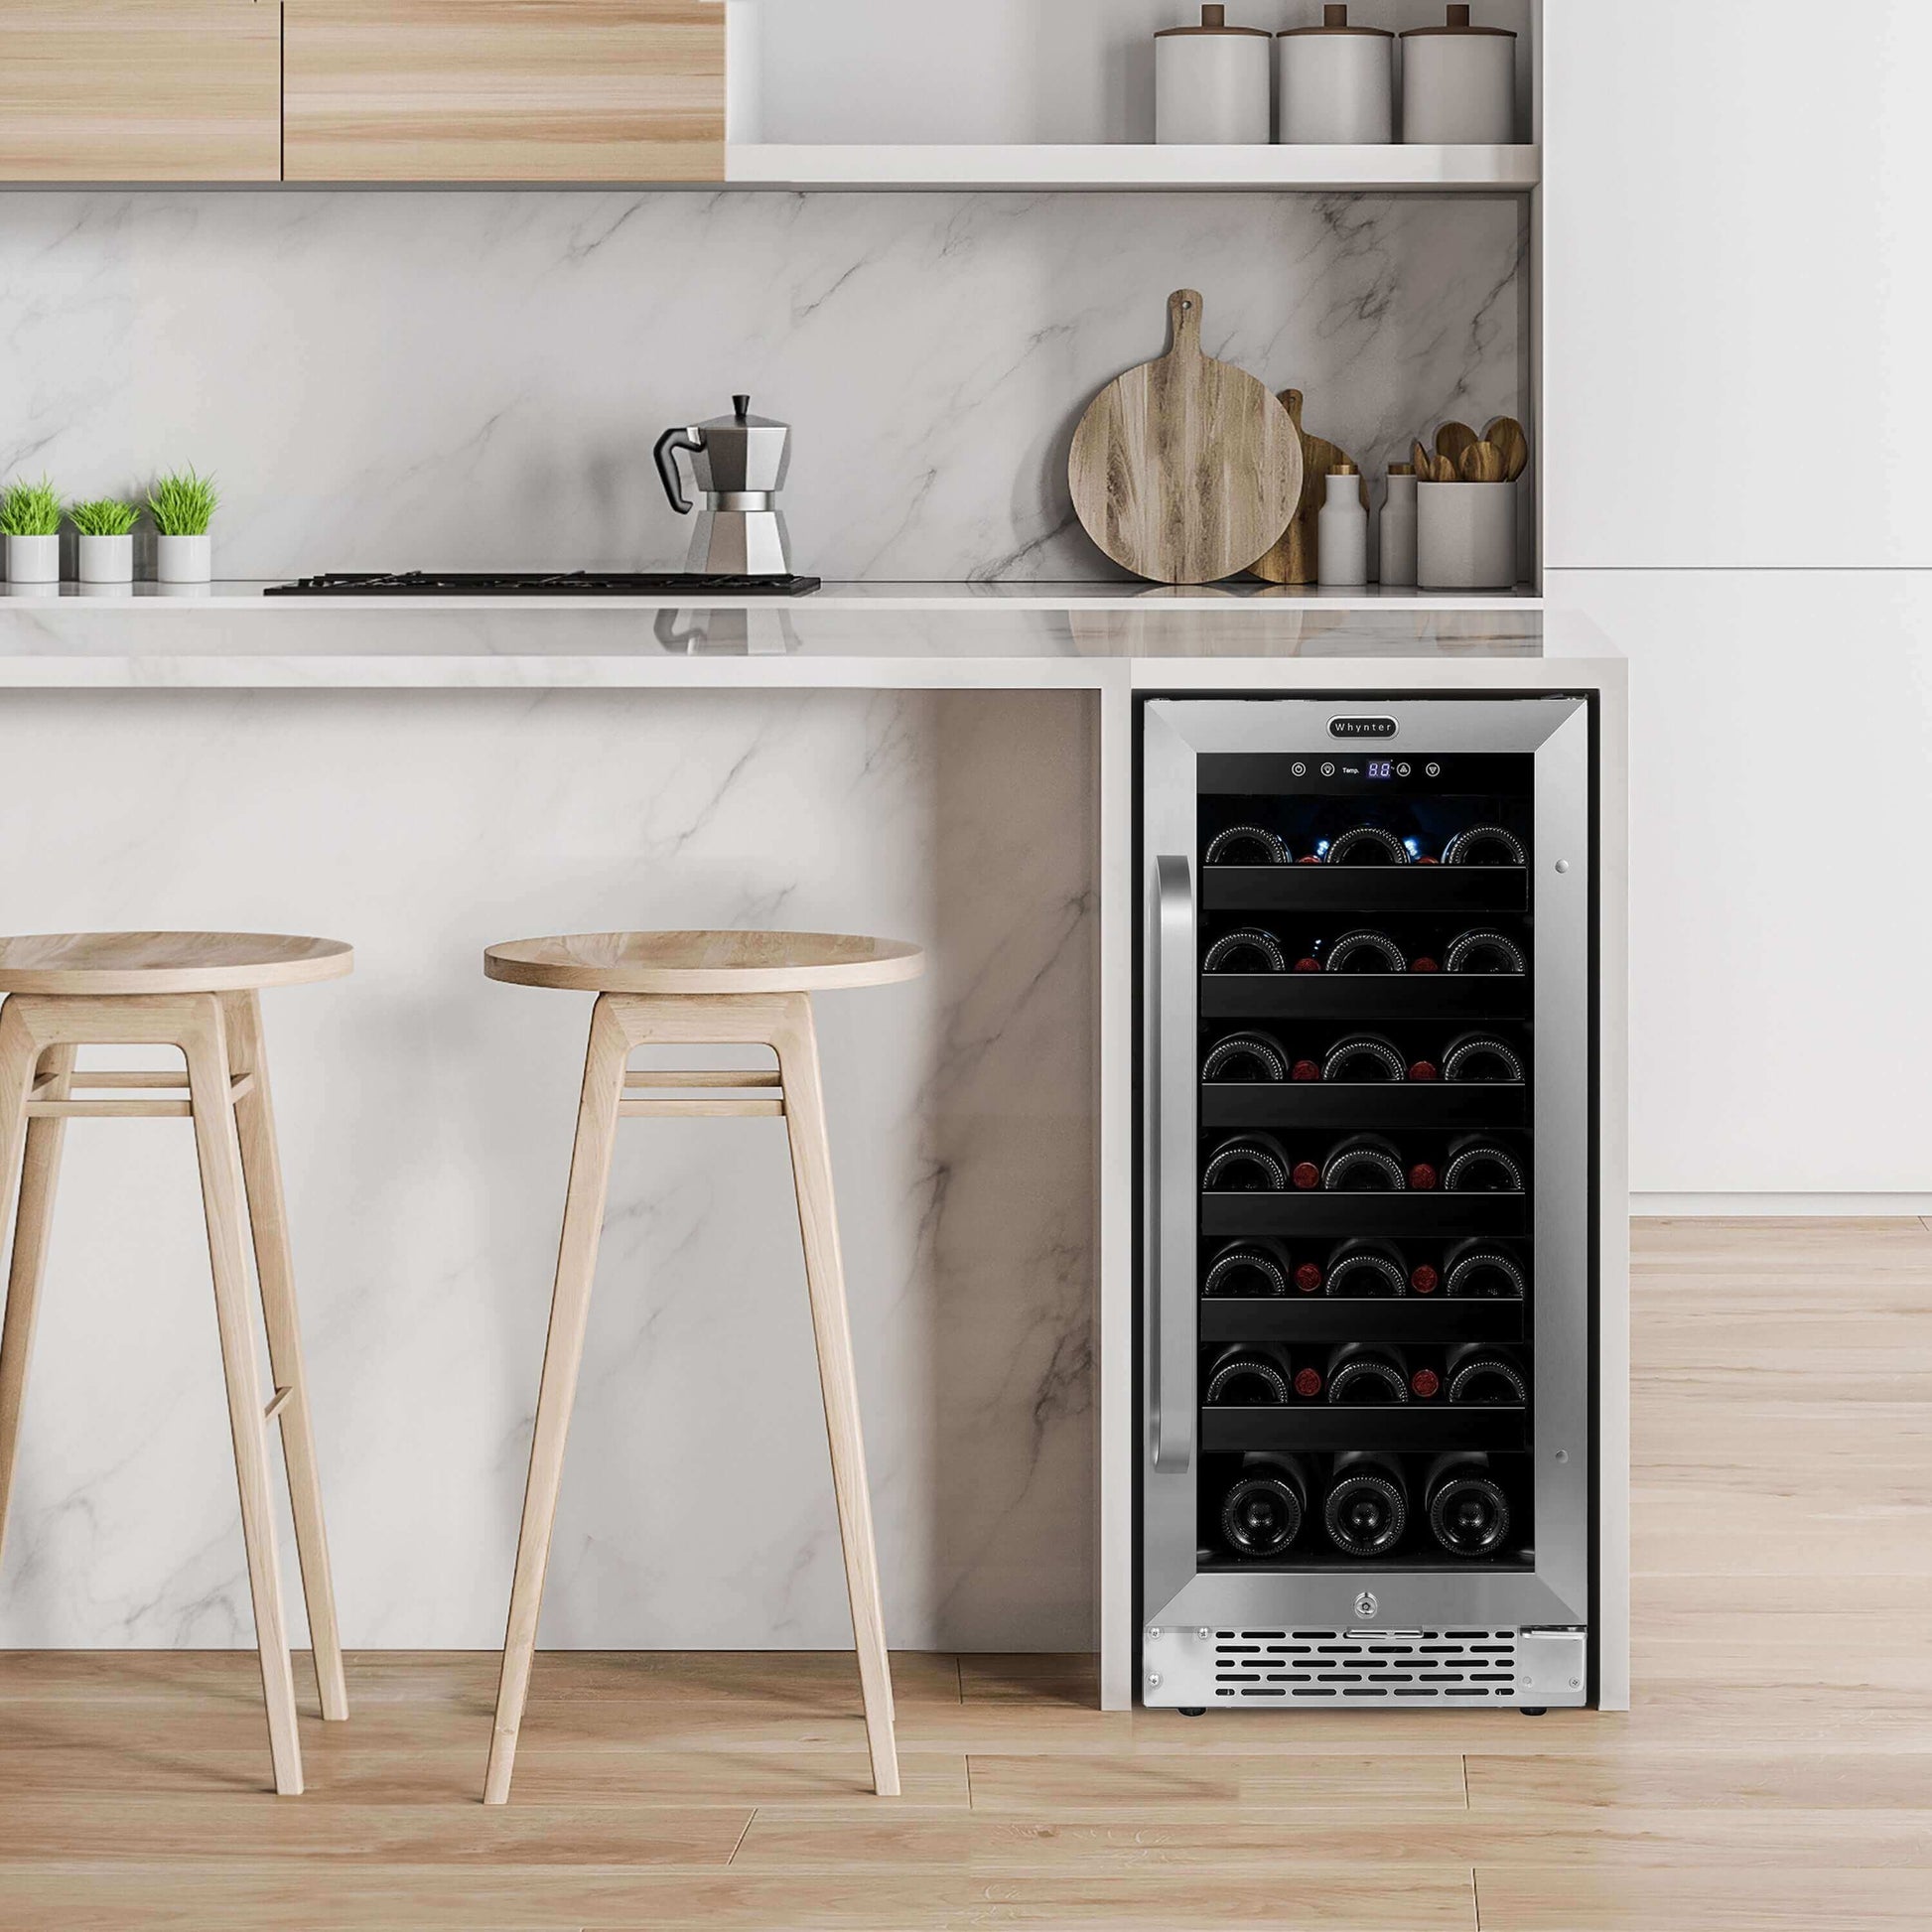 Whynter 15 inch Built-In 33 Bottle Undercounter Stainless Steel Wine Refrigerator with Reversible Door, Digital Control, Lock, and Carbon Filter